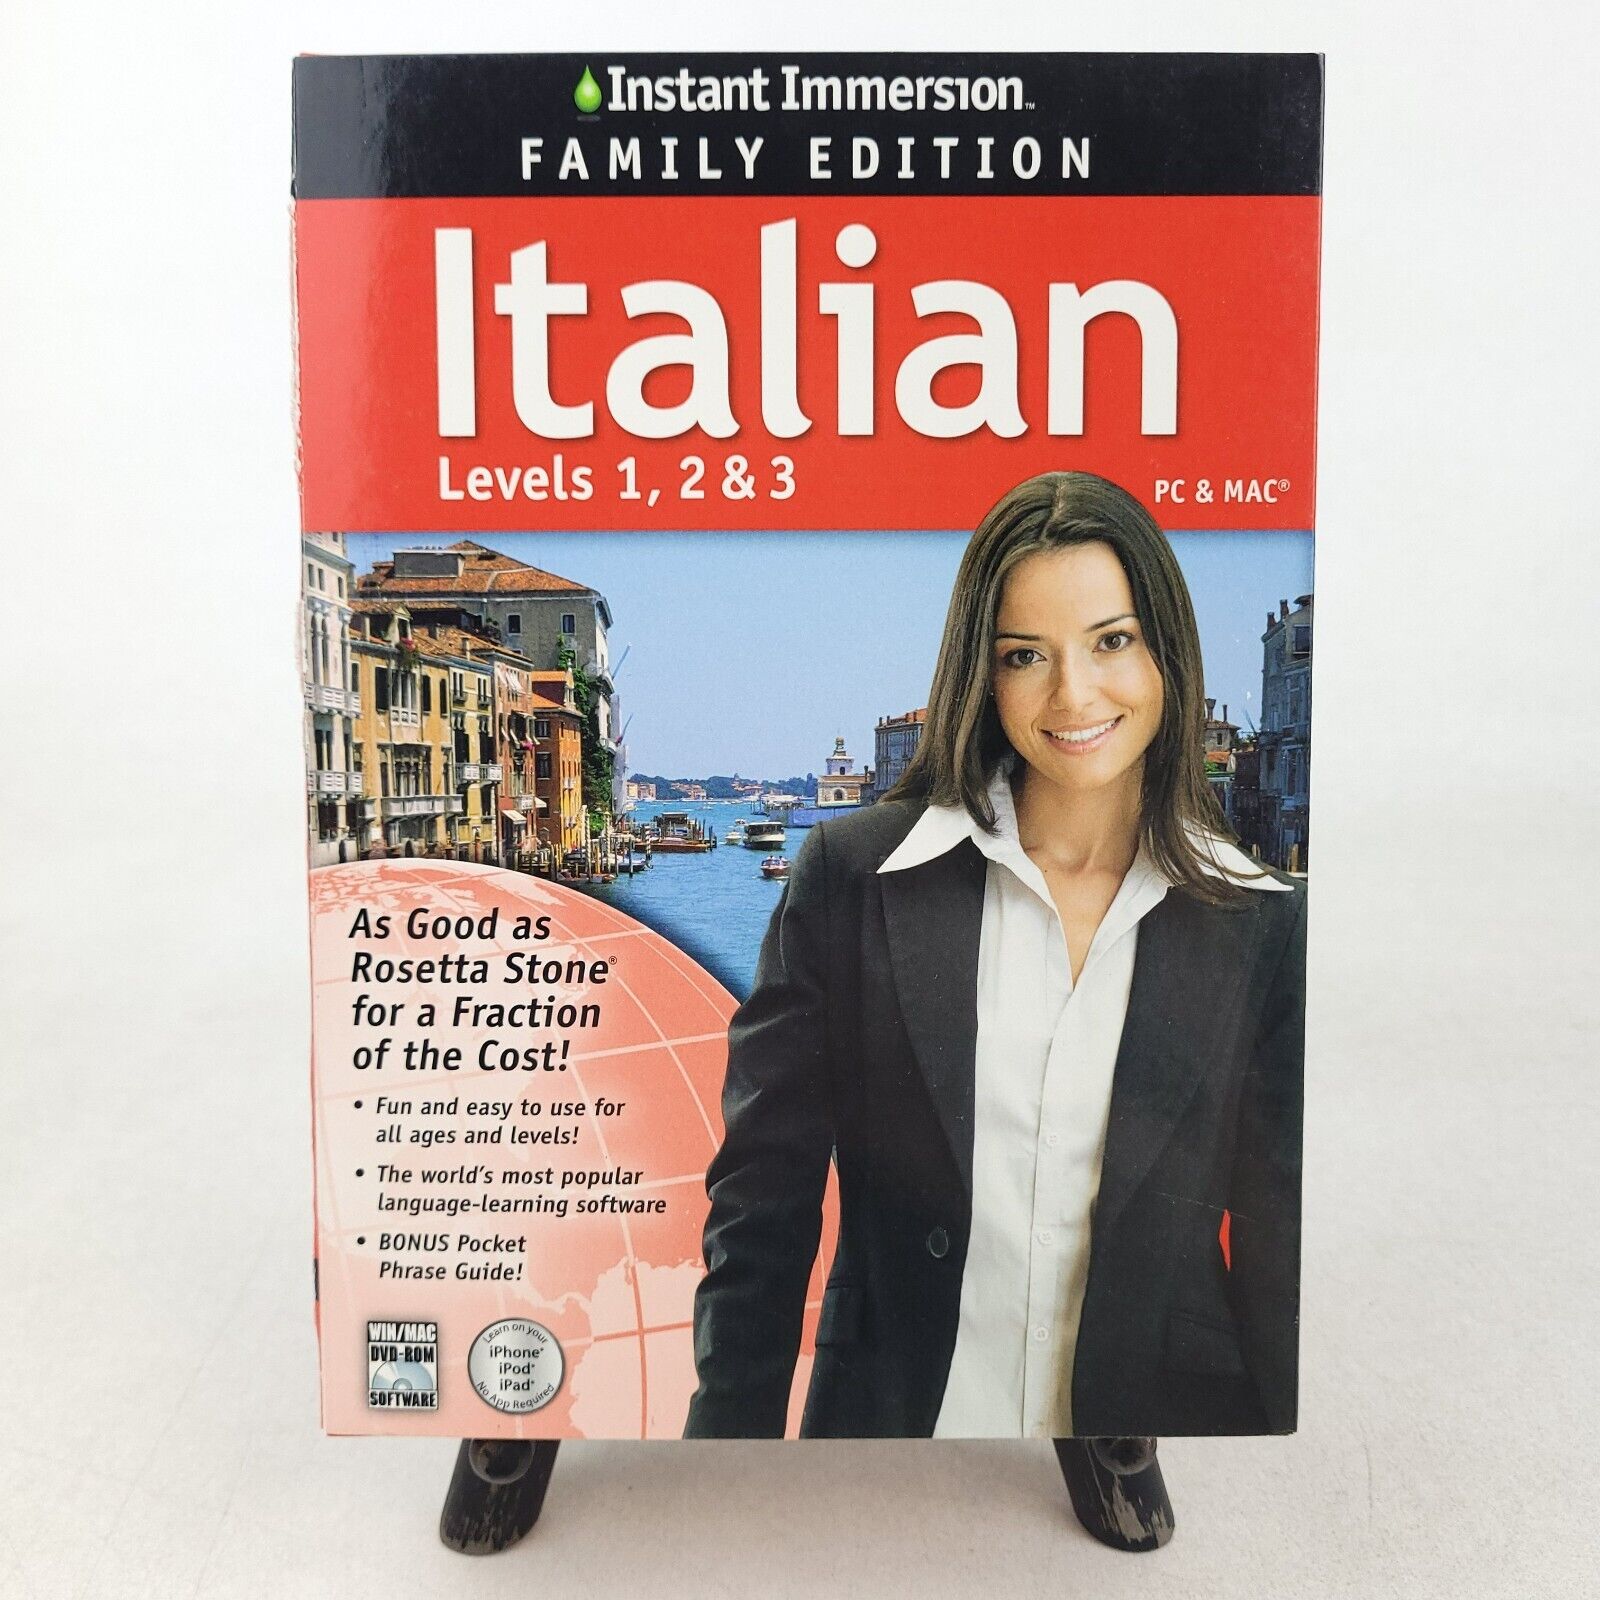 NEW SEALED Instant Immersion ITALIAN Levels 1, 2, & 3 Family Edition